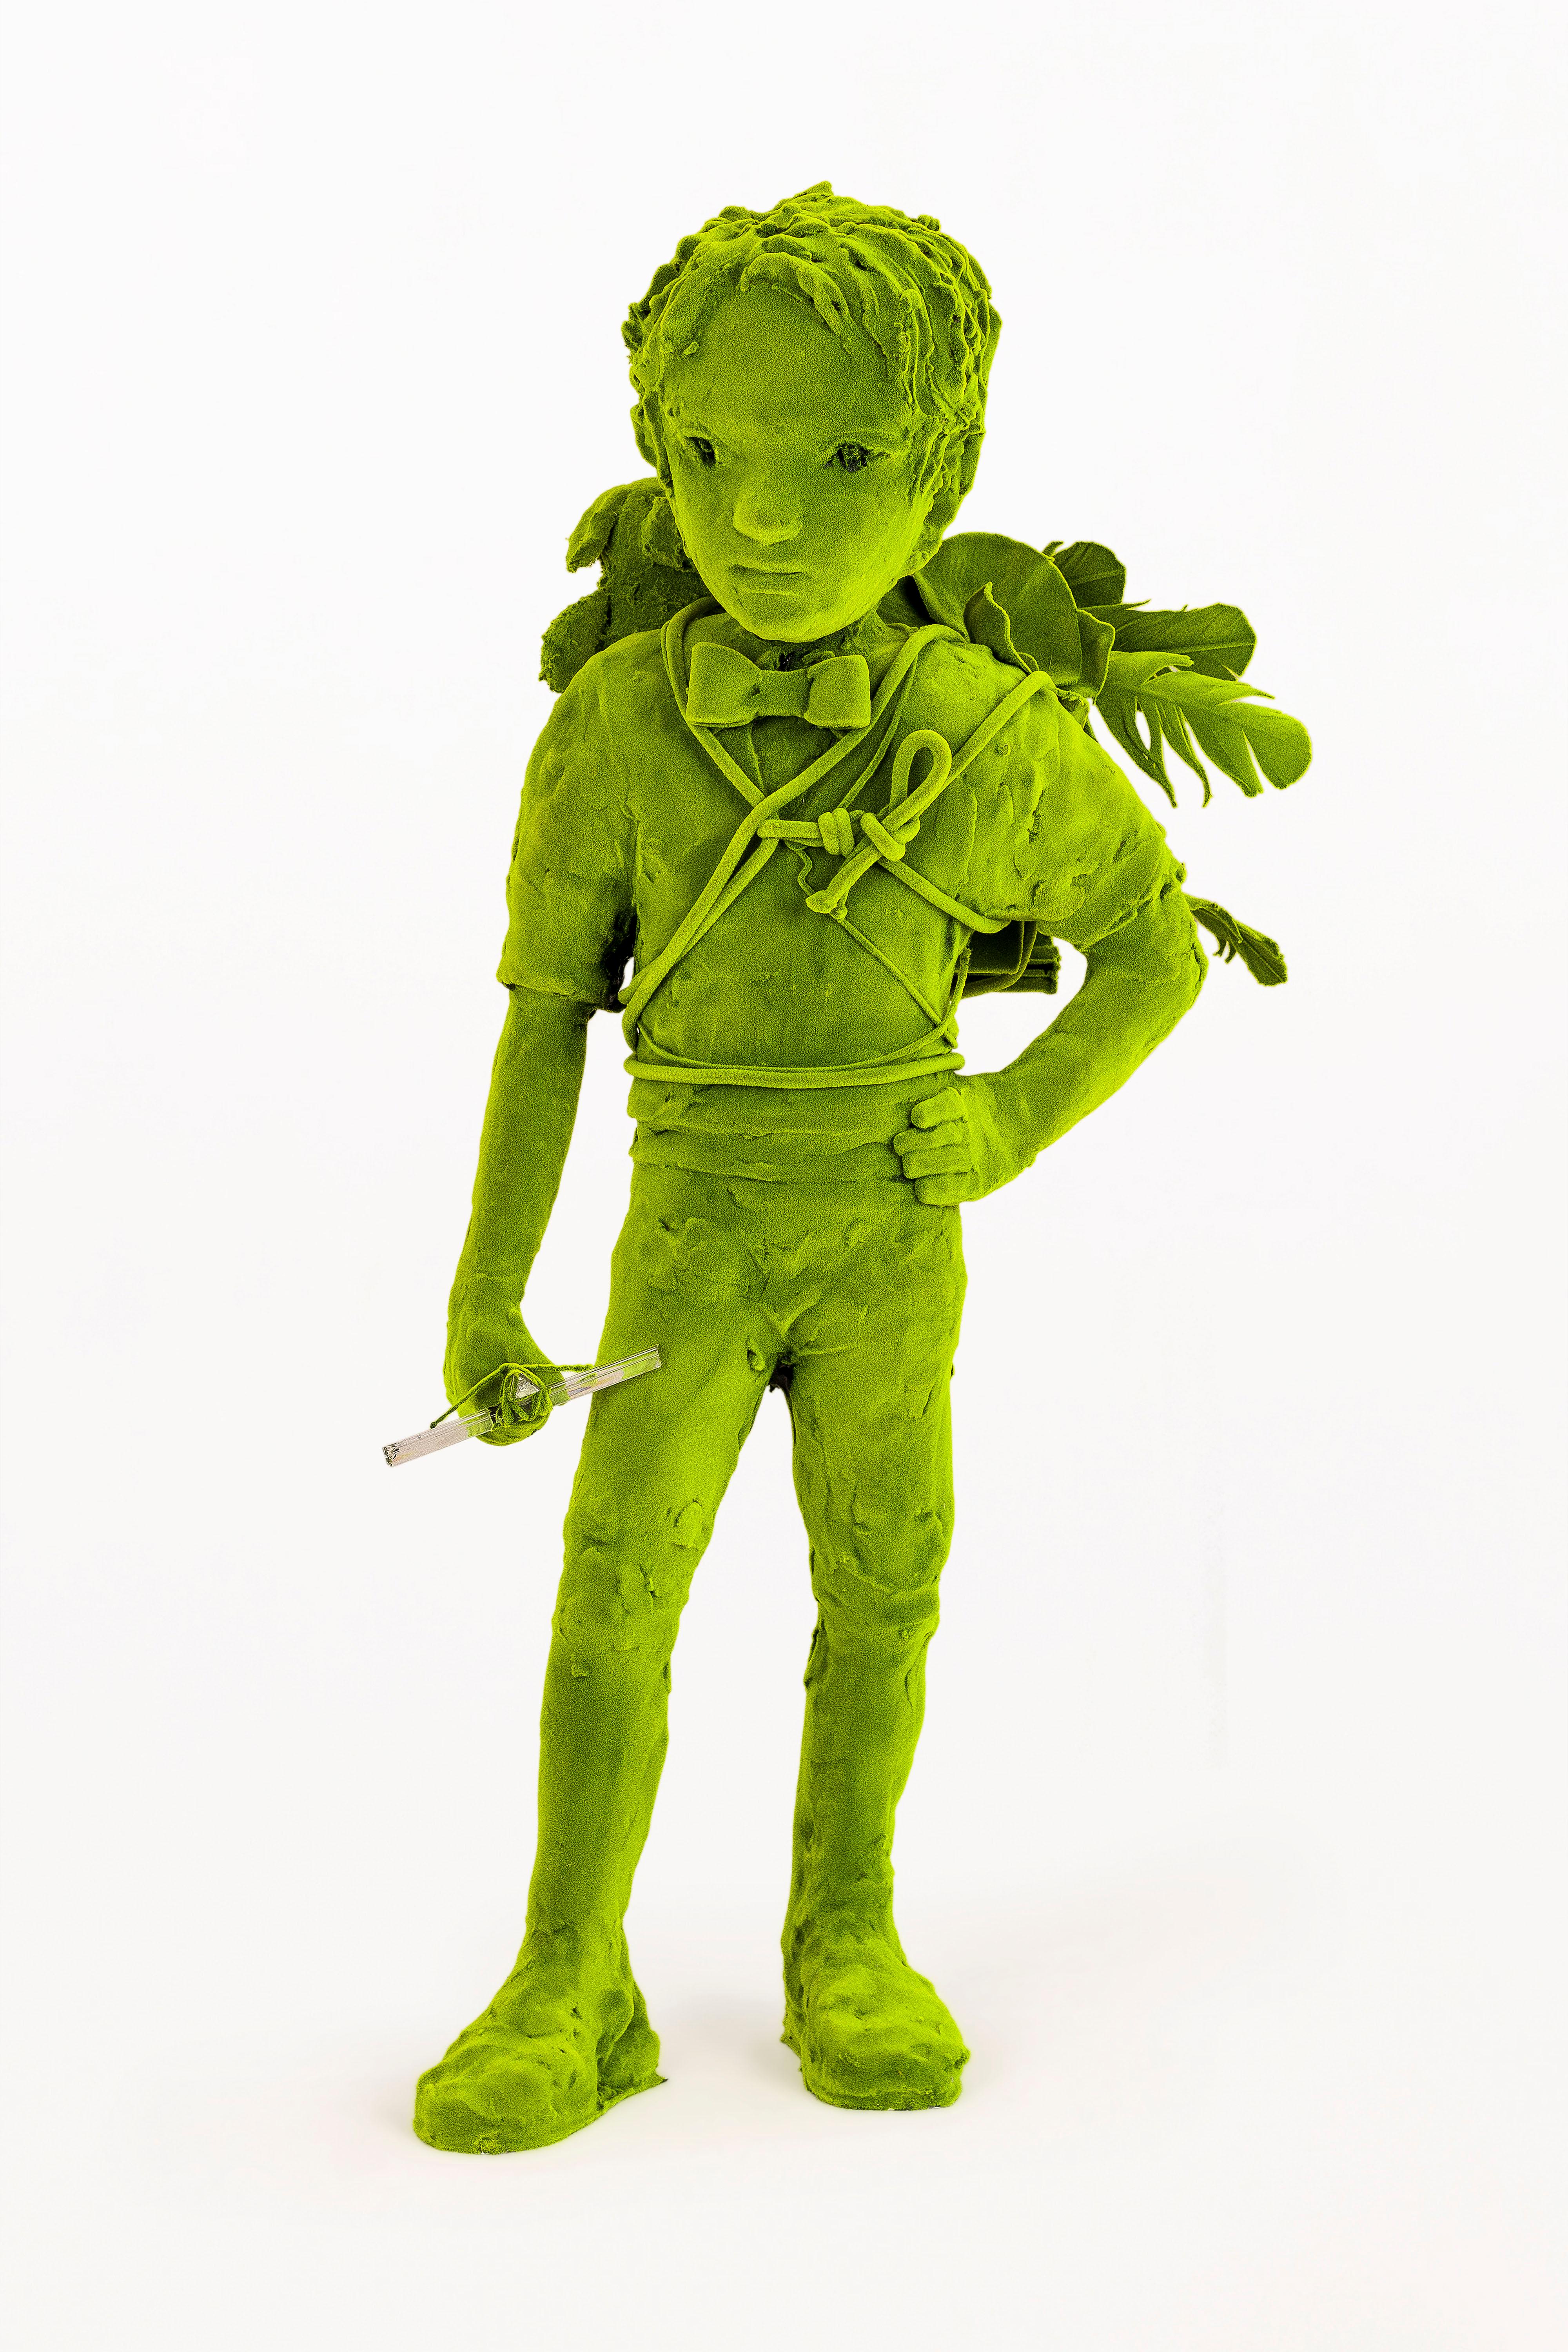 Moss Boy sculpture by Kim Simonson. Synthetic moss sculpture over a porcelain base. From the series of “Moss People”, circa 2020, Finland. Unique piece. Excellent condition. 

Kim Simonsson (1974 Helsinki) is a Finnish visual artist. He graduated